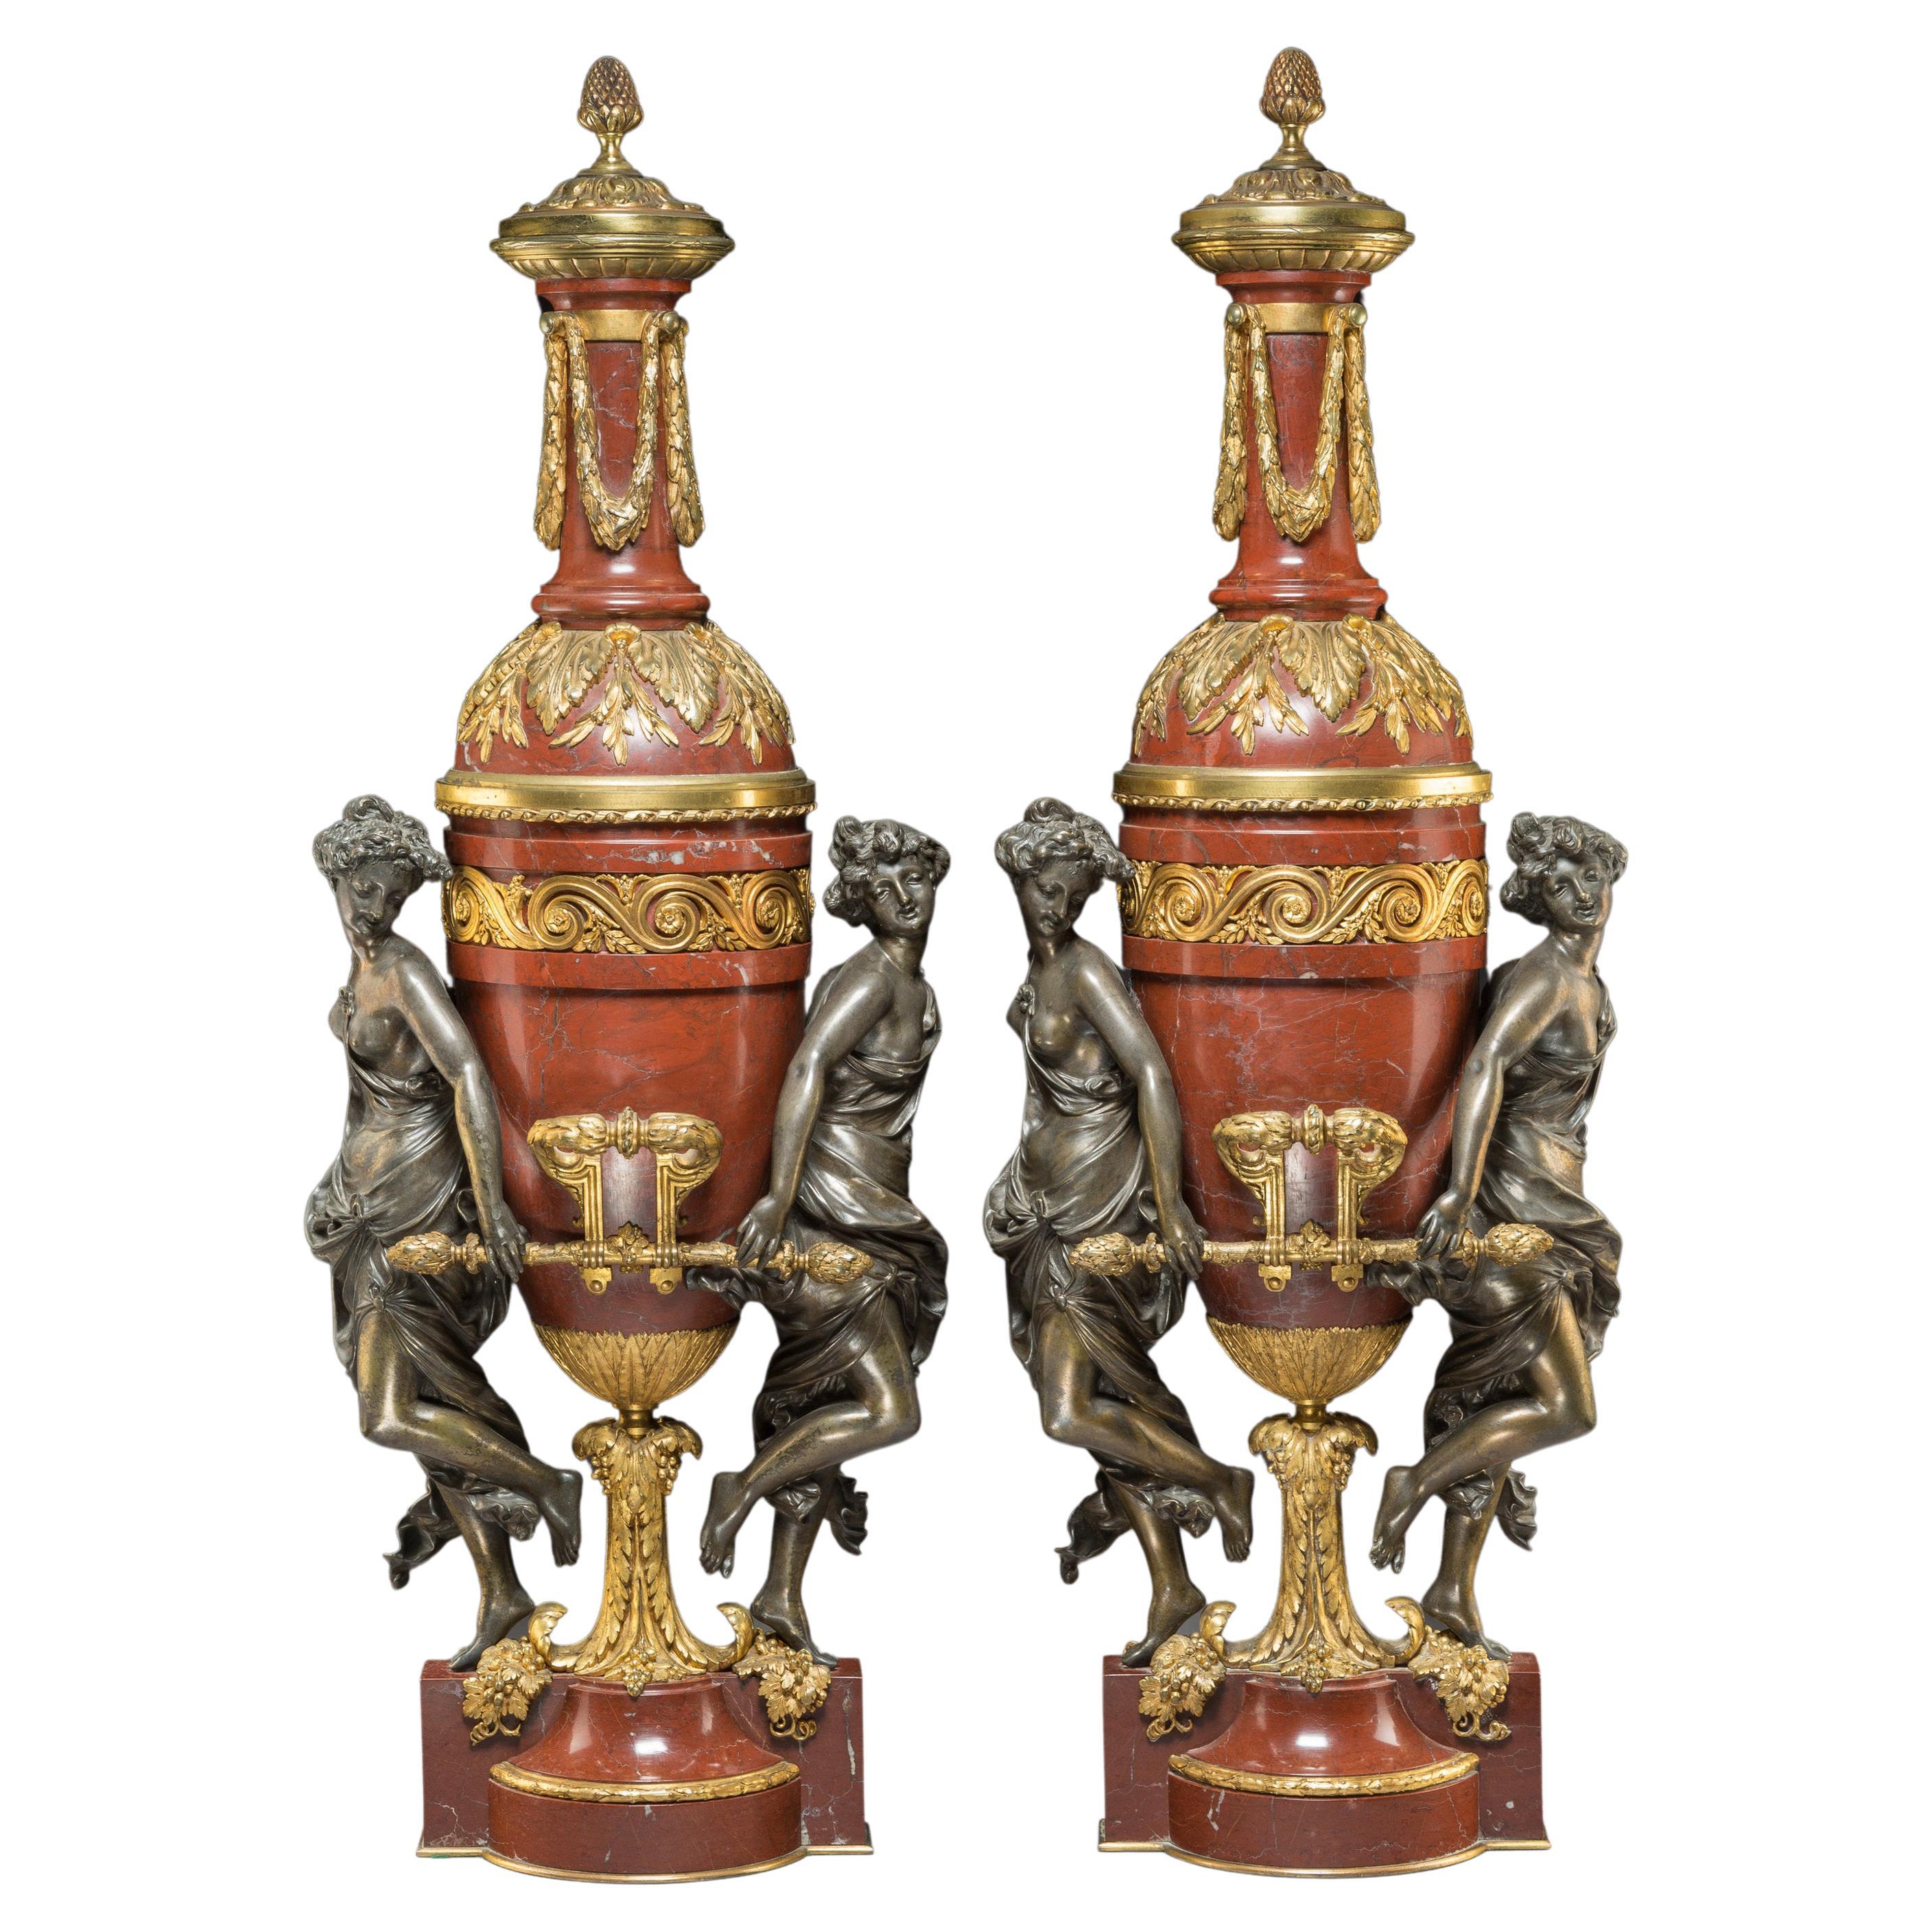 French Ormolu and Patinated Bronze-Mounted Marble Vases with Covers by Gagneau For Sale